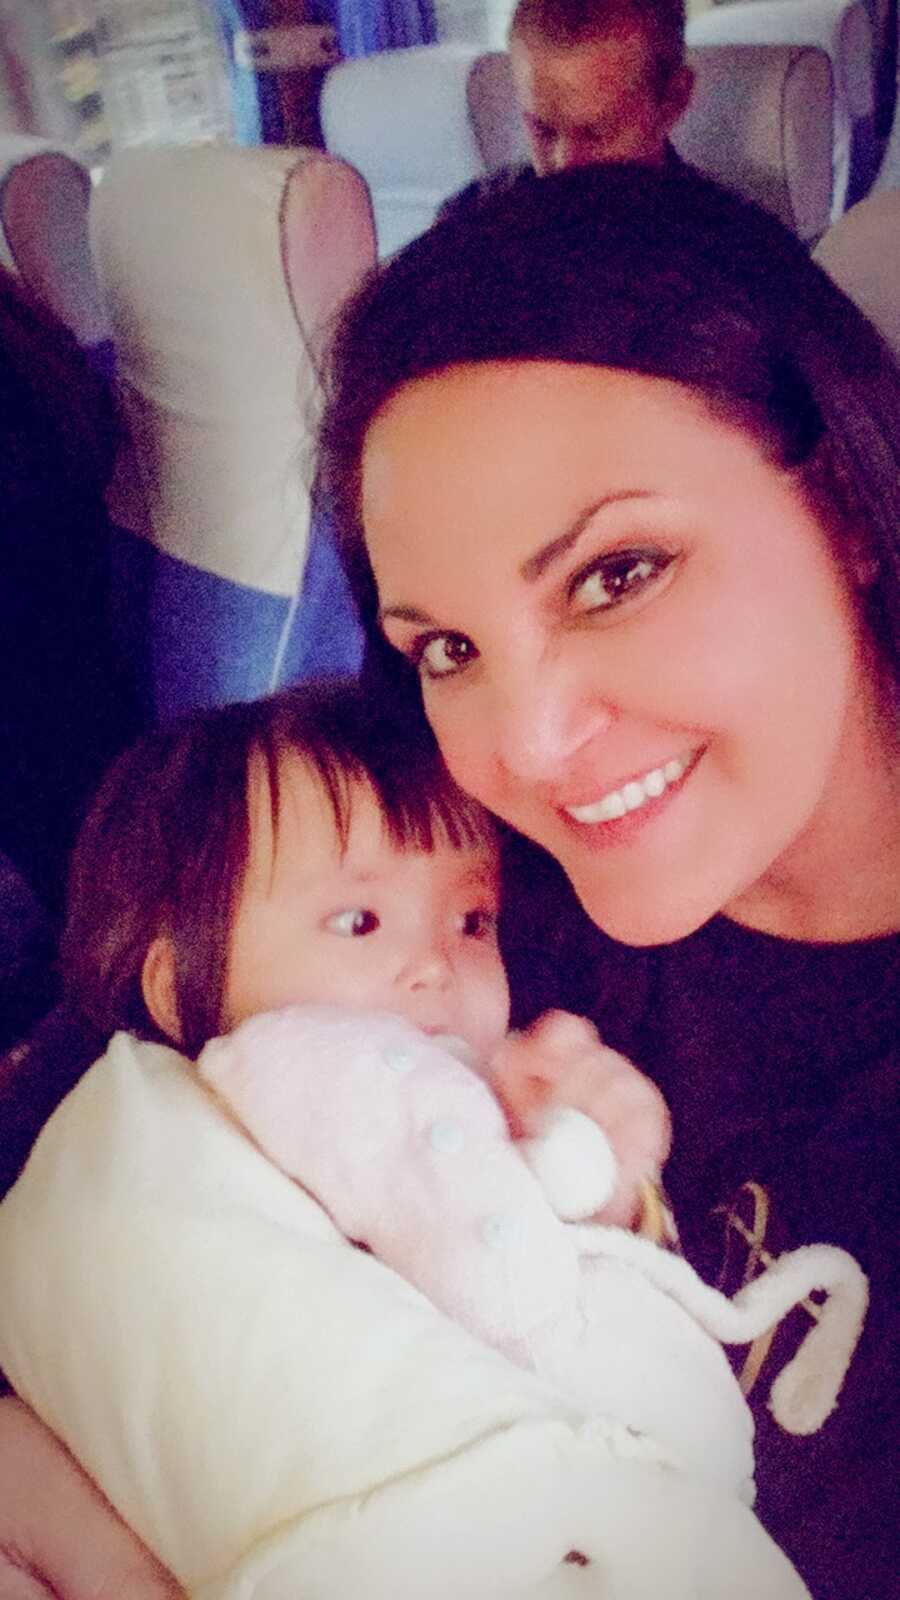 mom takes selfie with internationally adopted daughter while on a plane